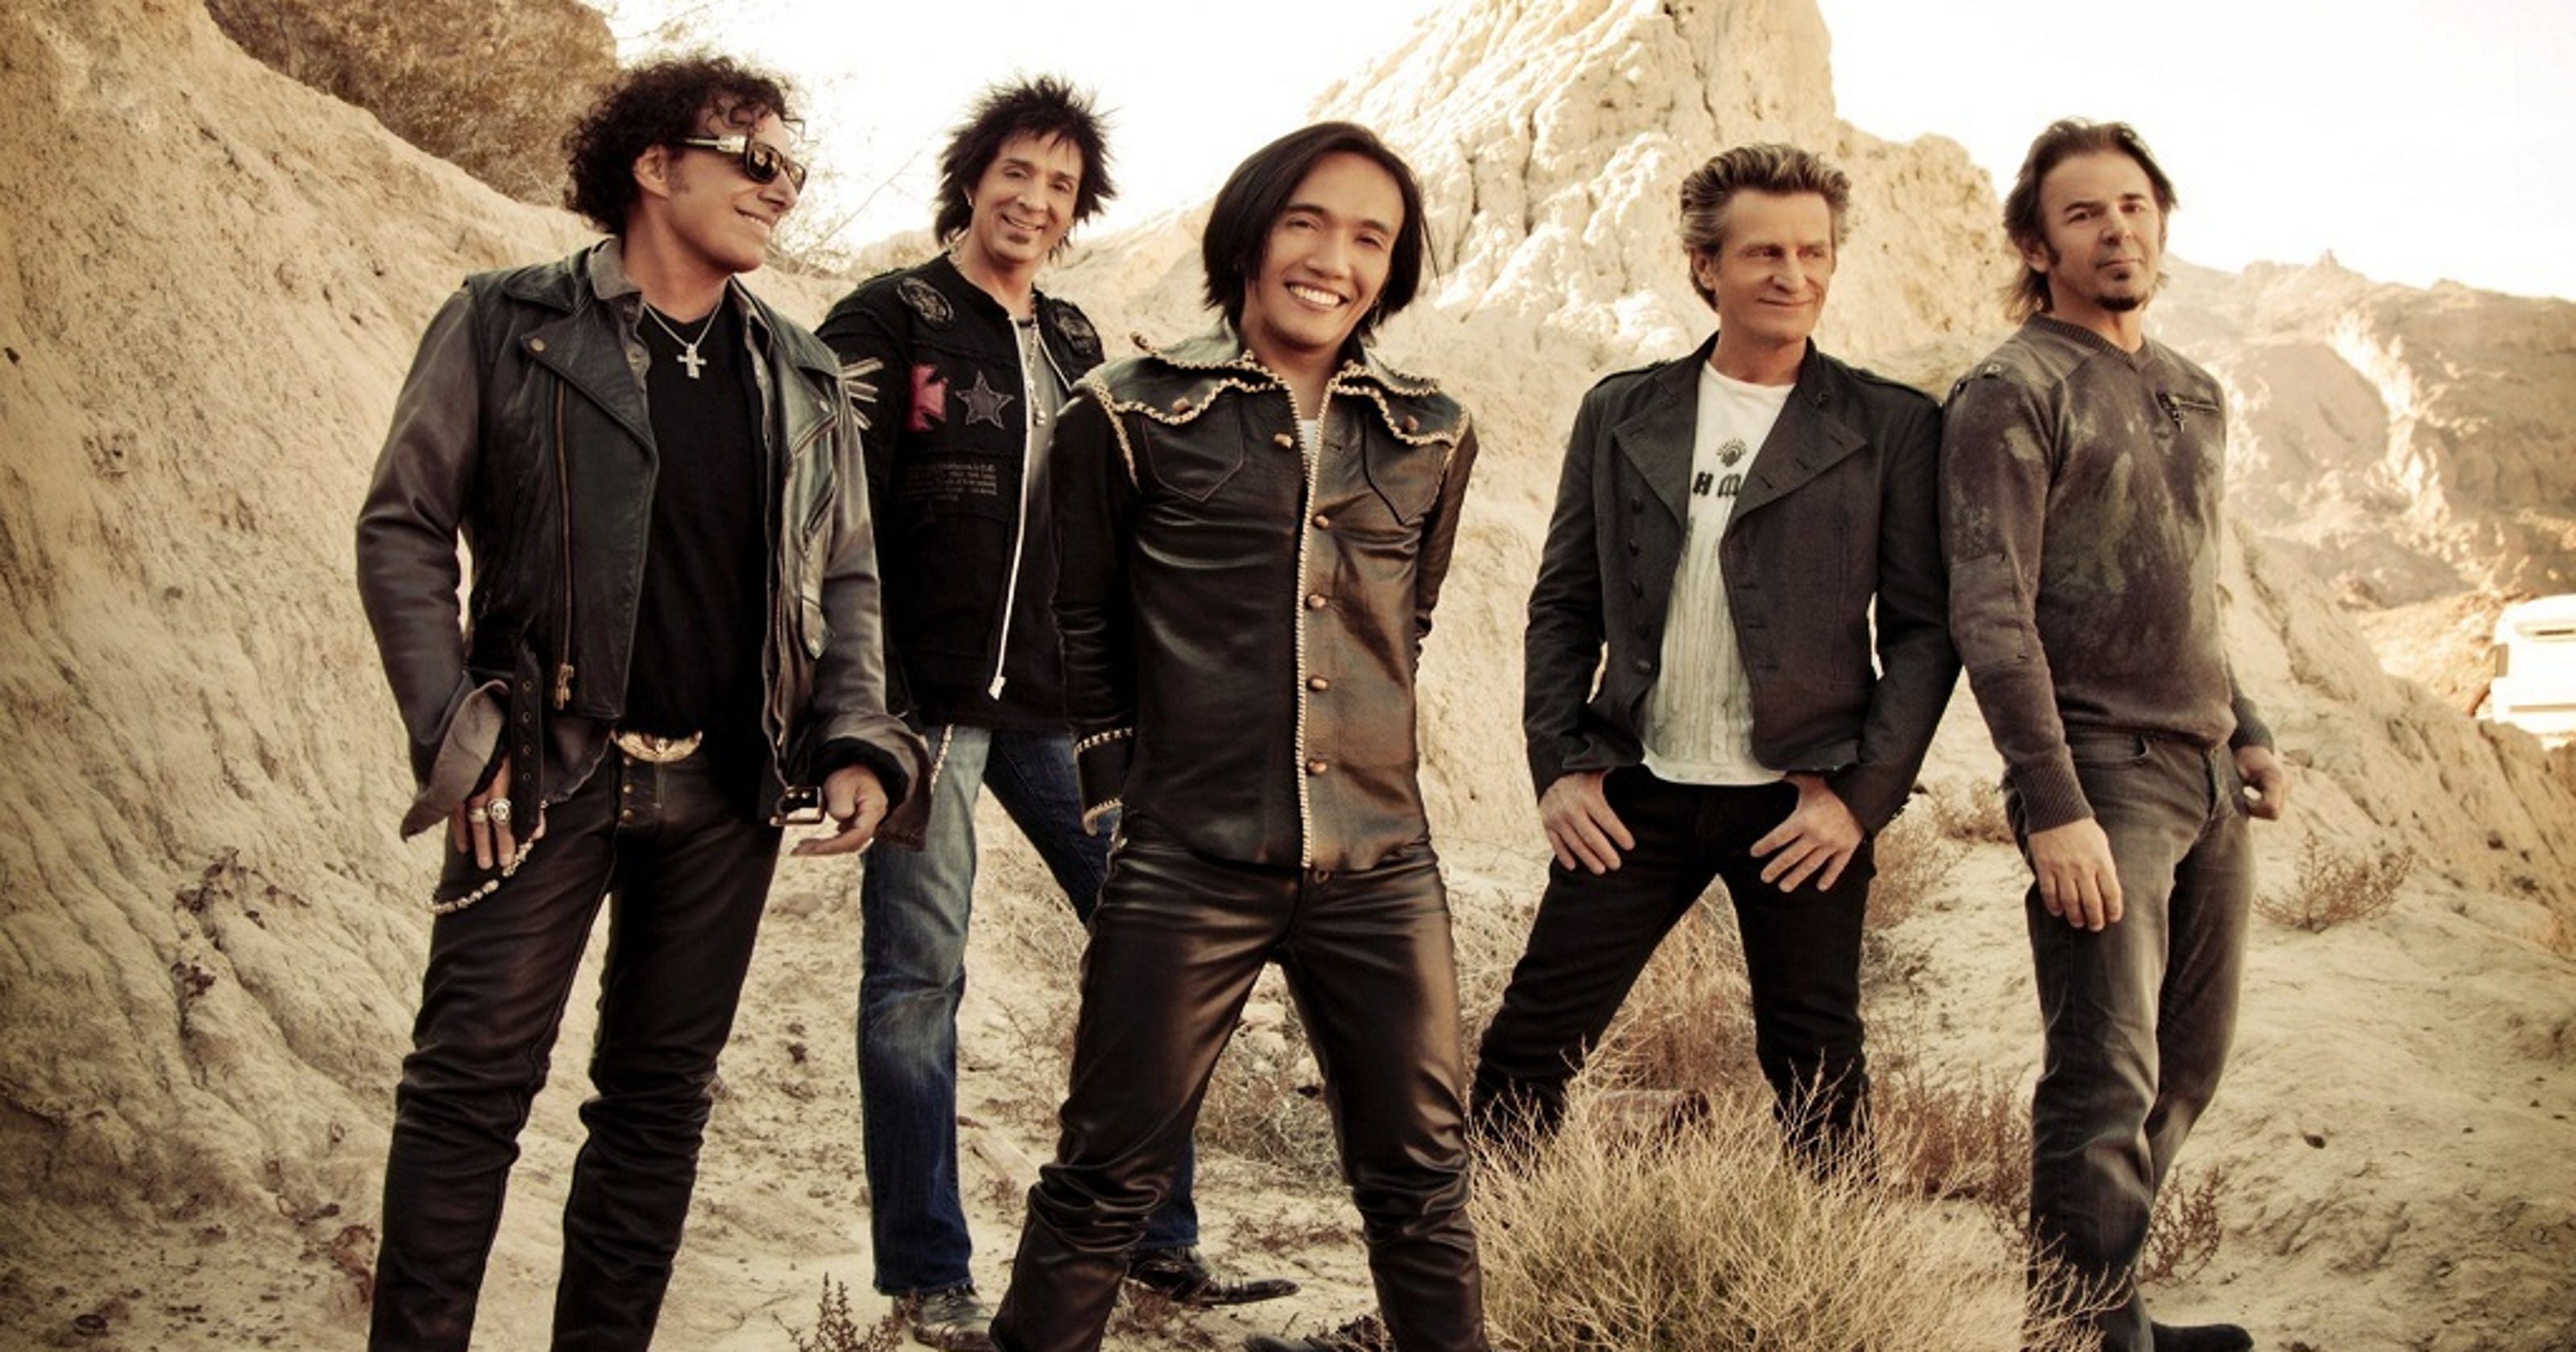 journey band current members